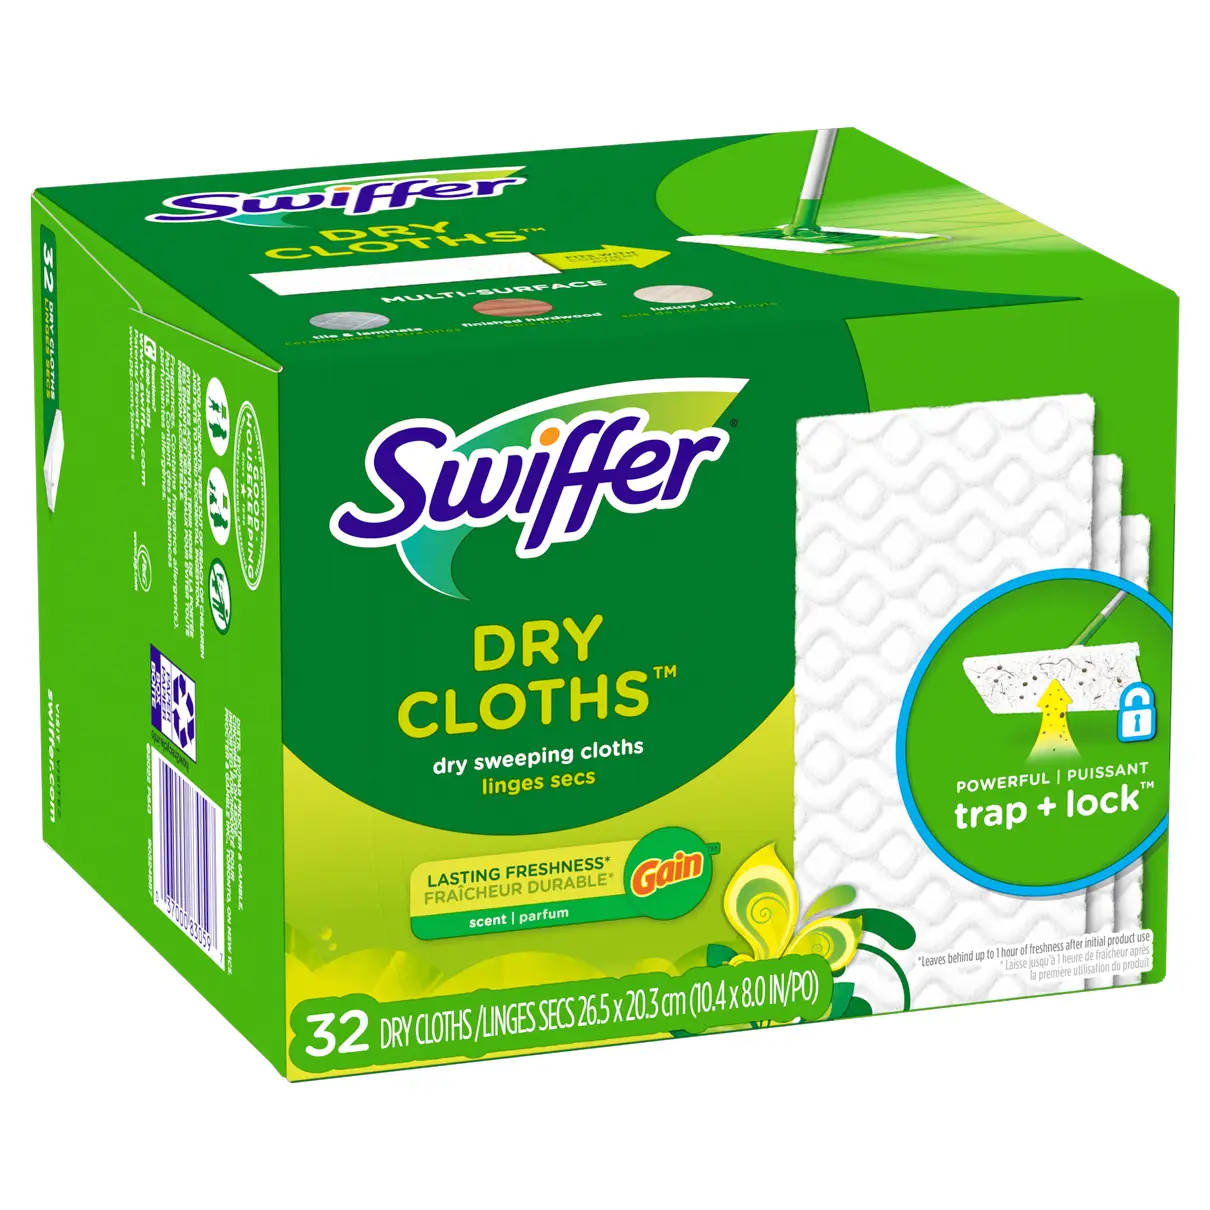 Swiffer Sweeper Dry + Wet Multi Sweeping Kit (1 Sweeper, 7 Dry Cloths, 3  Wet Cloths)